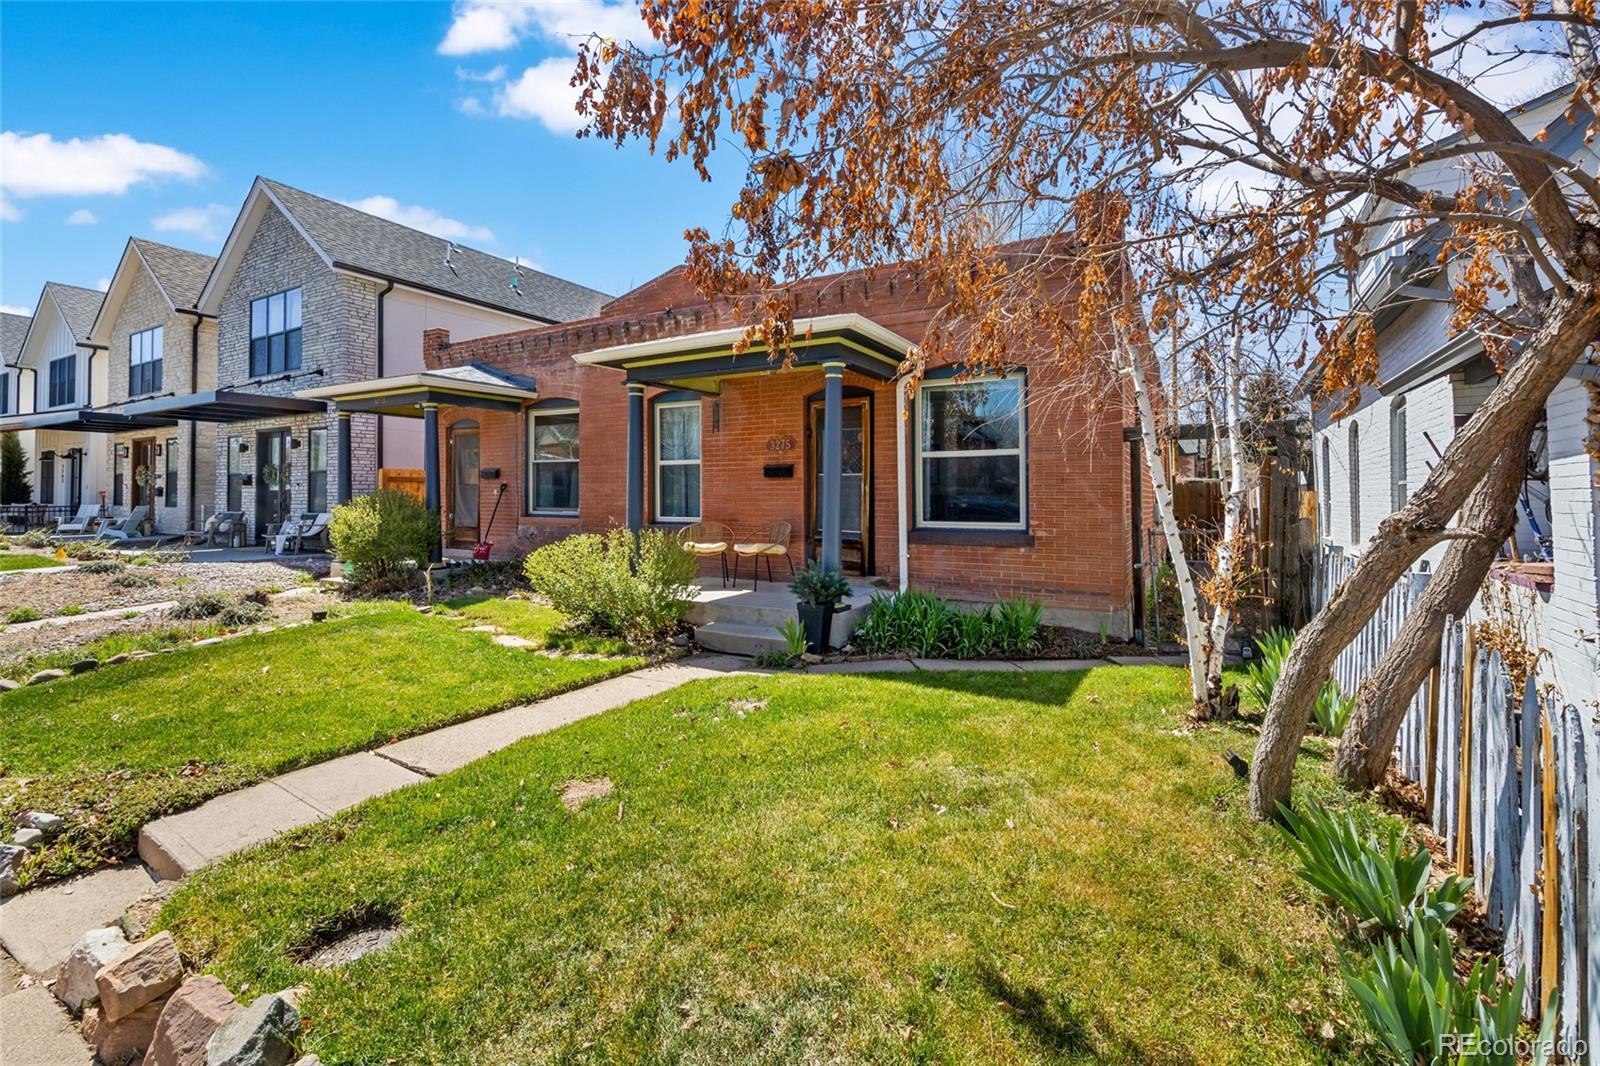 Photo one of 3275 Perry St Denver CO 80212 | MLS 9484660